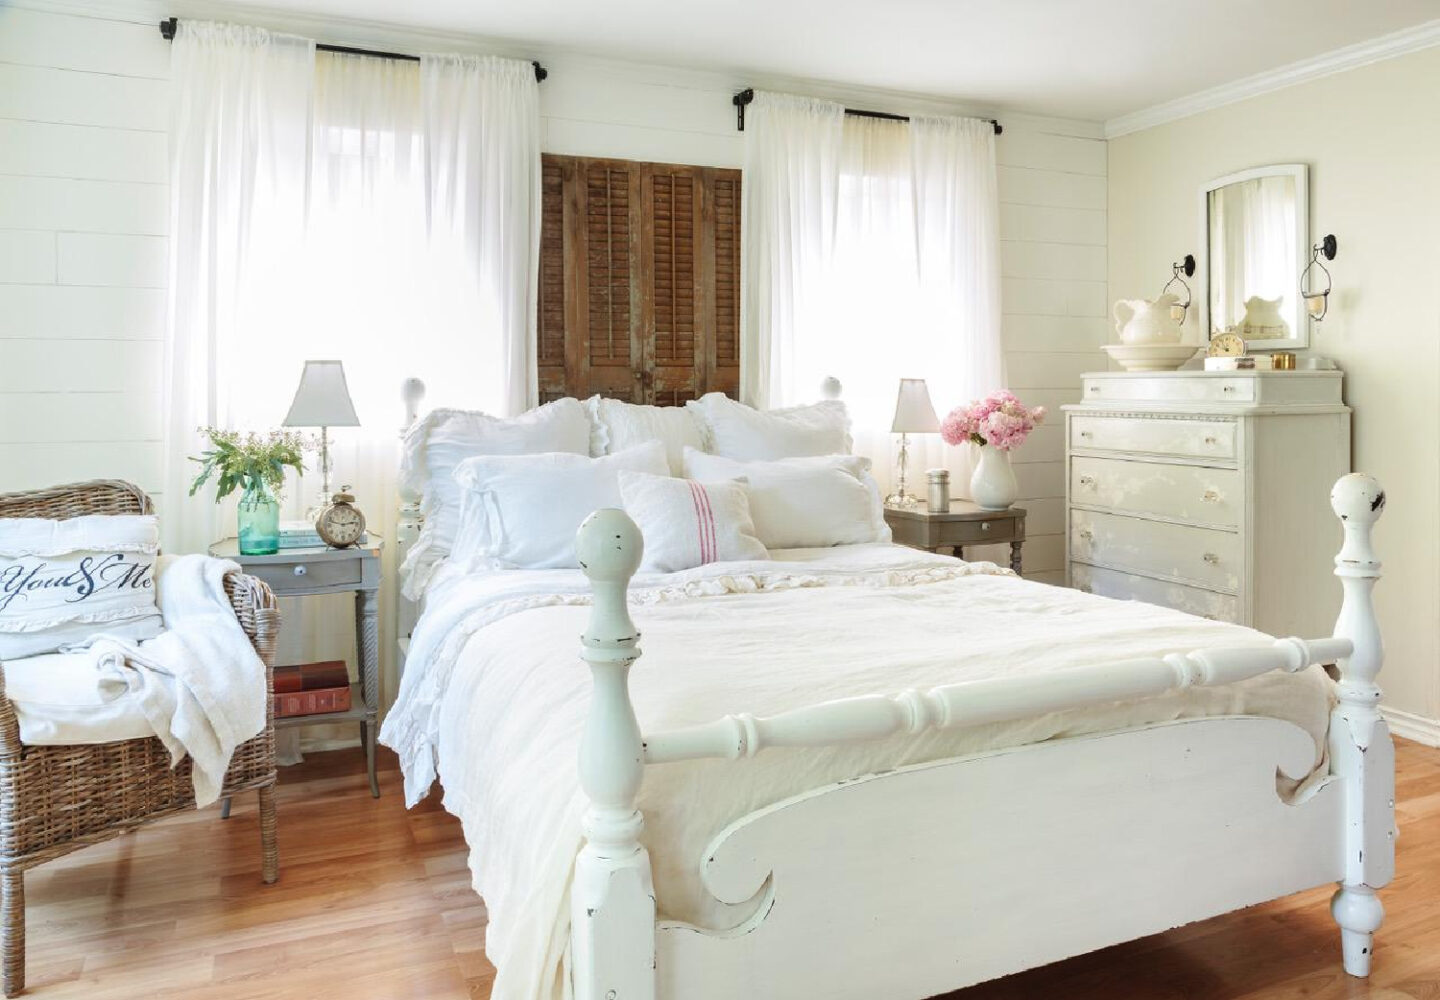 Serene, romantic, ethereal white bedroom from Fifi O'Neill's SHADES OF WHITE (CICO Books, 2021). #fifioneill #whiteinteriors